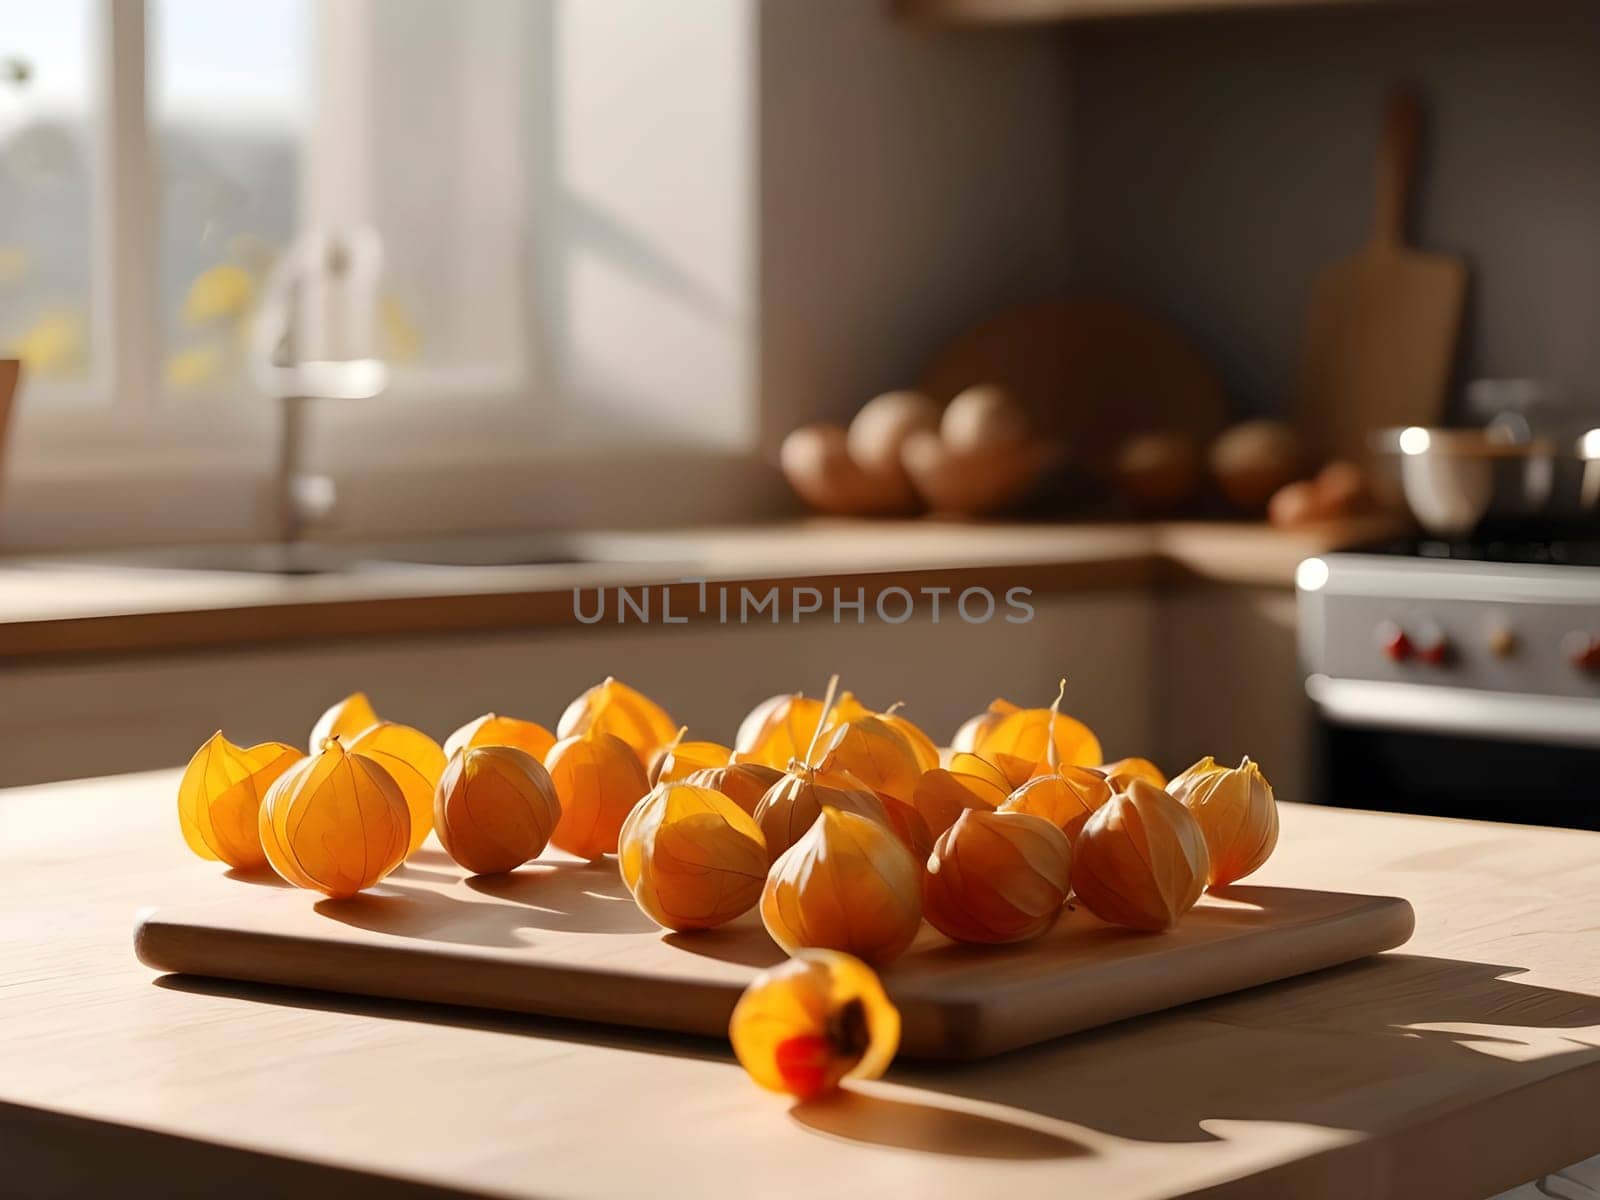 Kitchen Elegance: Afternoon Glow on a Wooden Cutting Board with Physalis by mailos